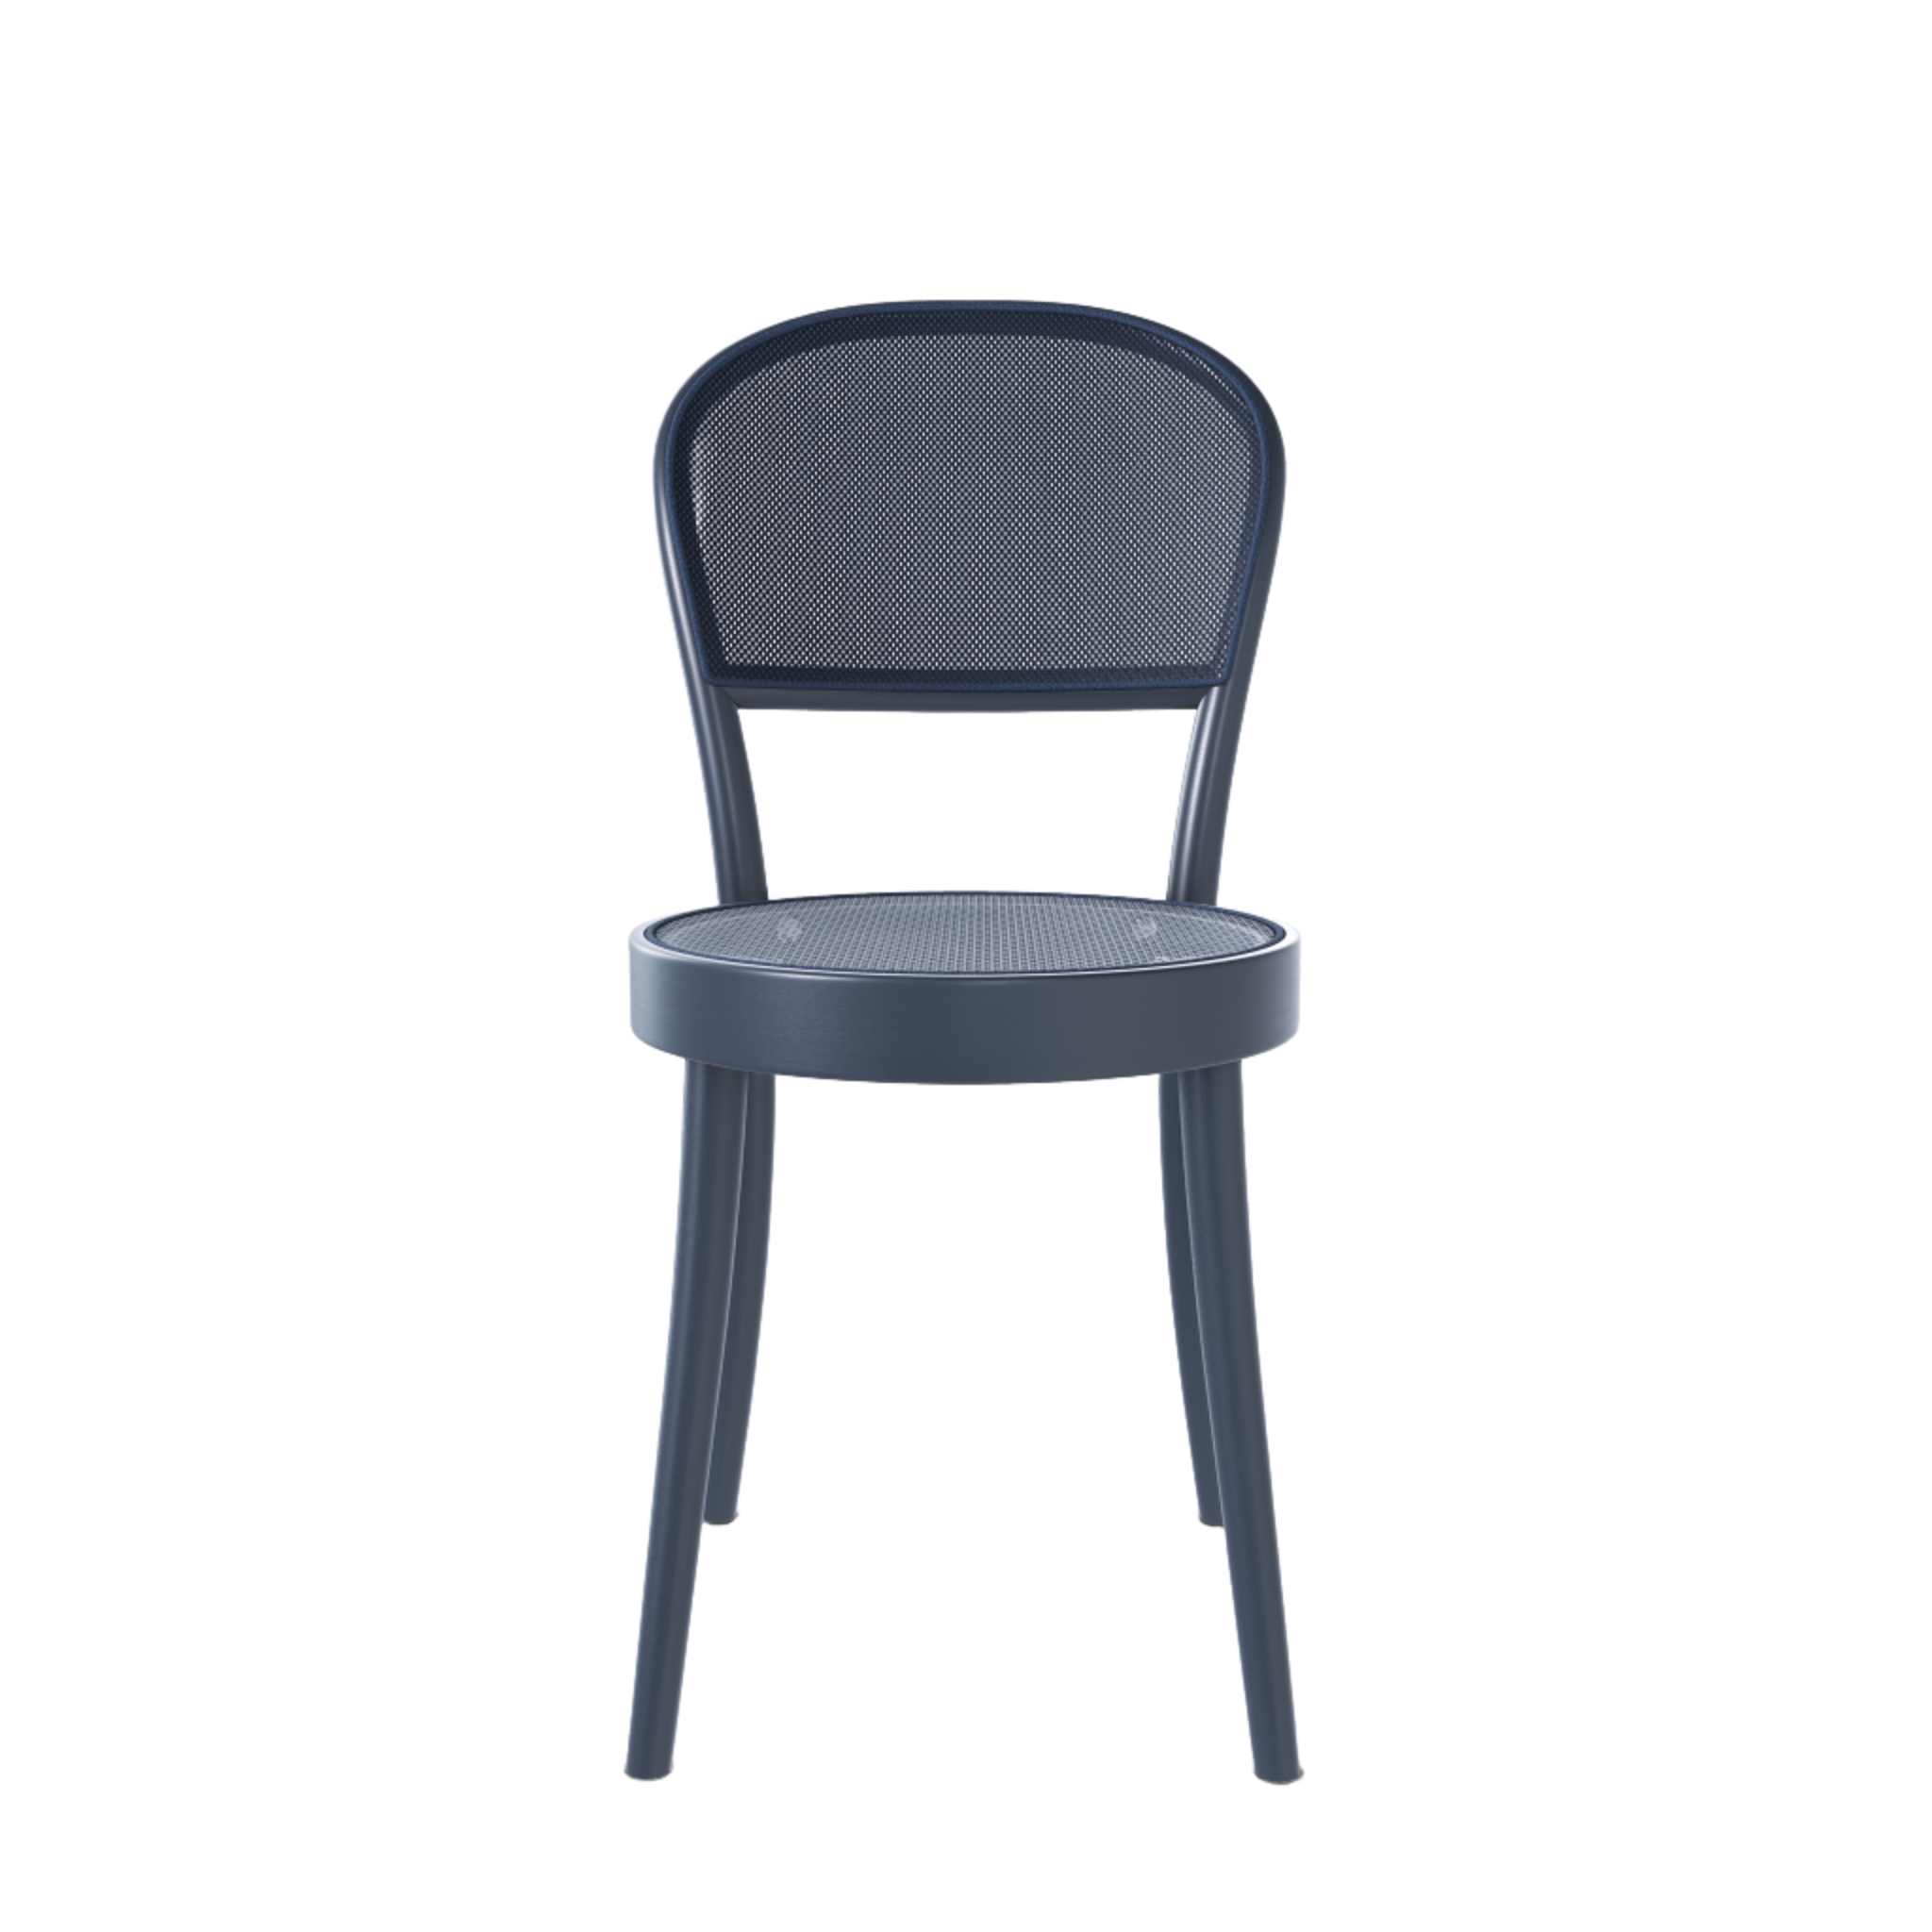 Ton 314 chair with matching seat mesh in graphite blue